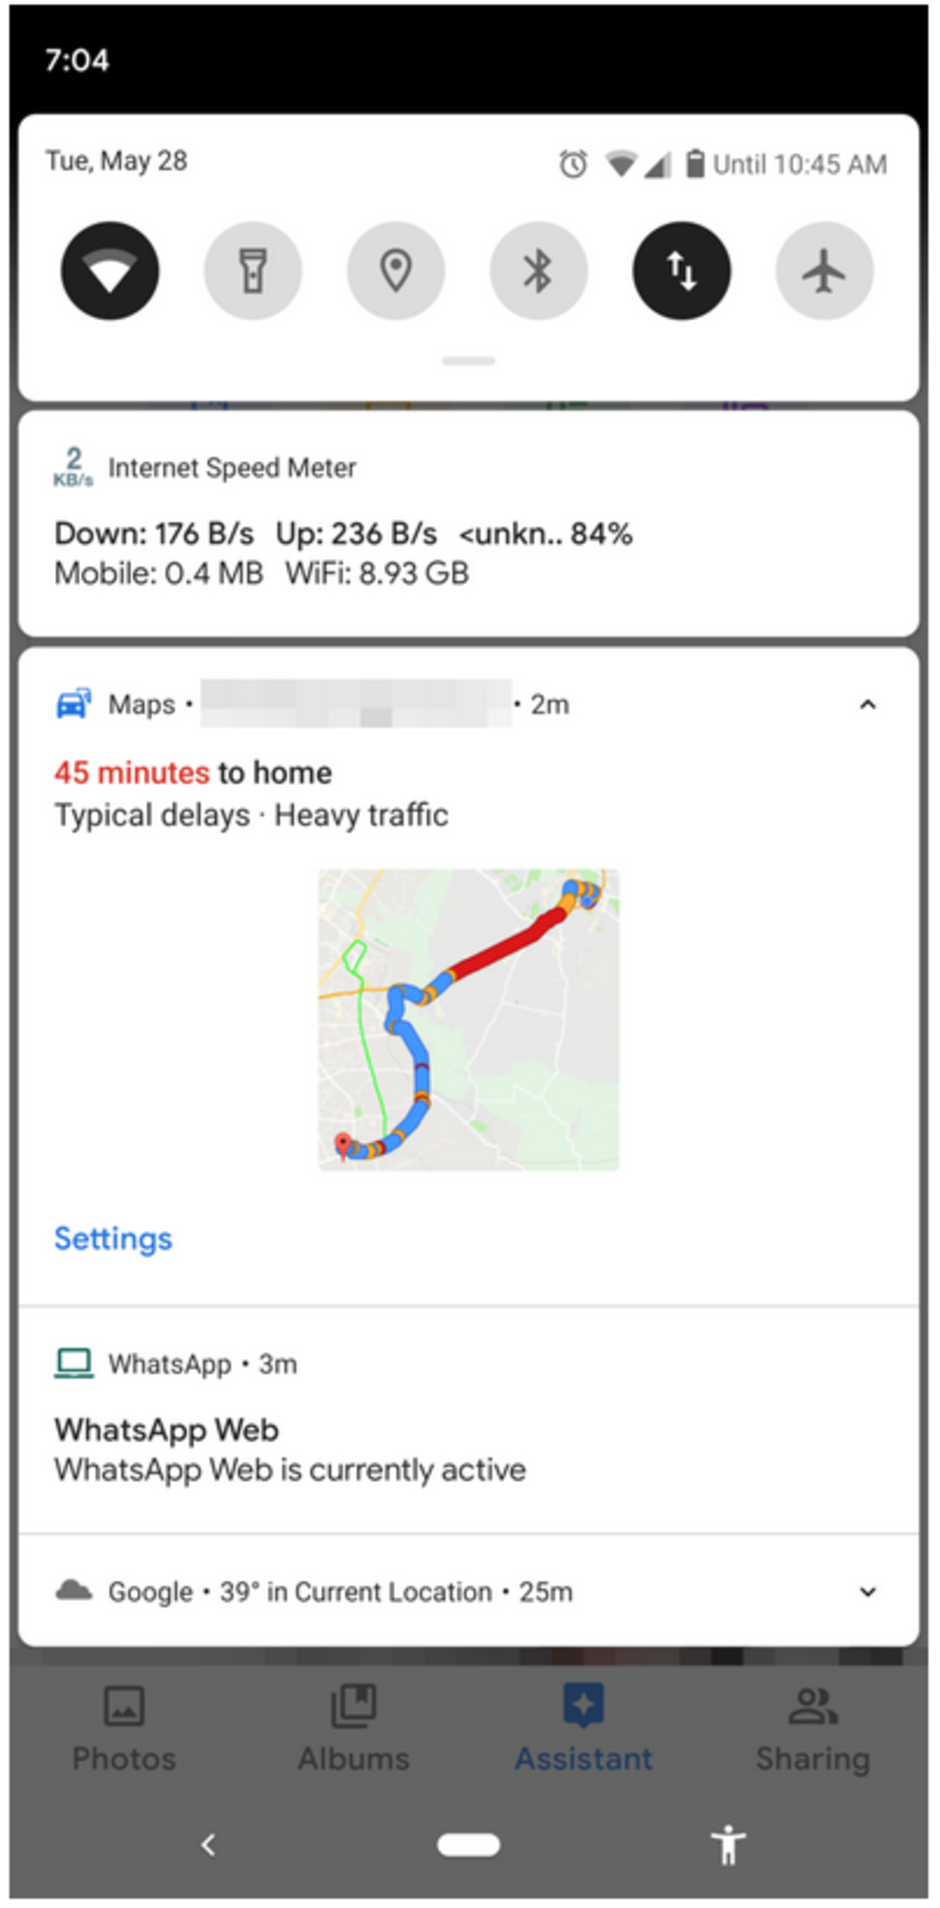 Google Maps now provides commuters with a preview of their trip before leaving to and from work - Google Maps now allows commuters to see a preview of their drive to and from work